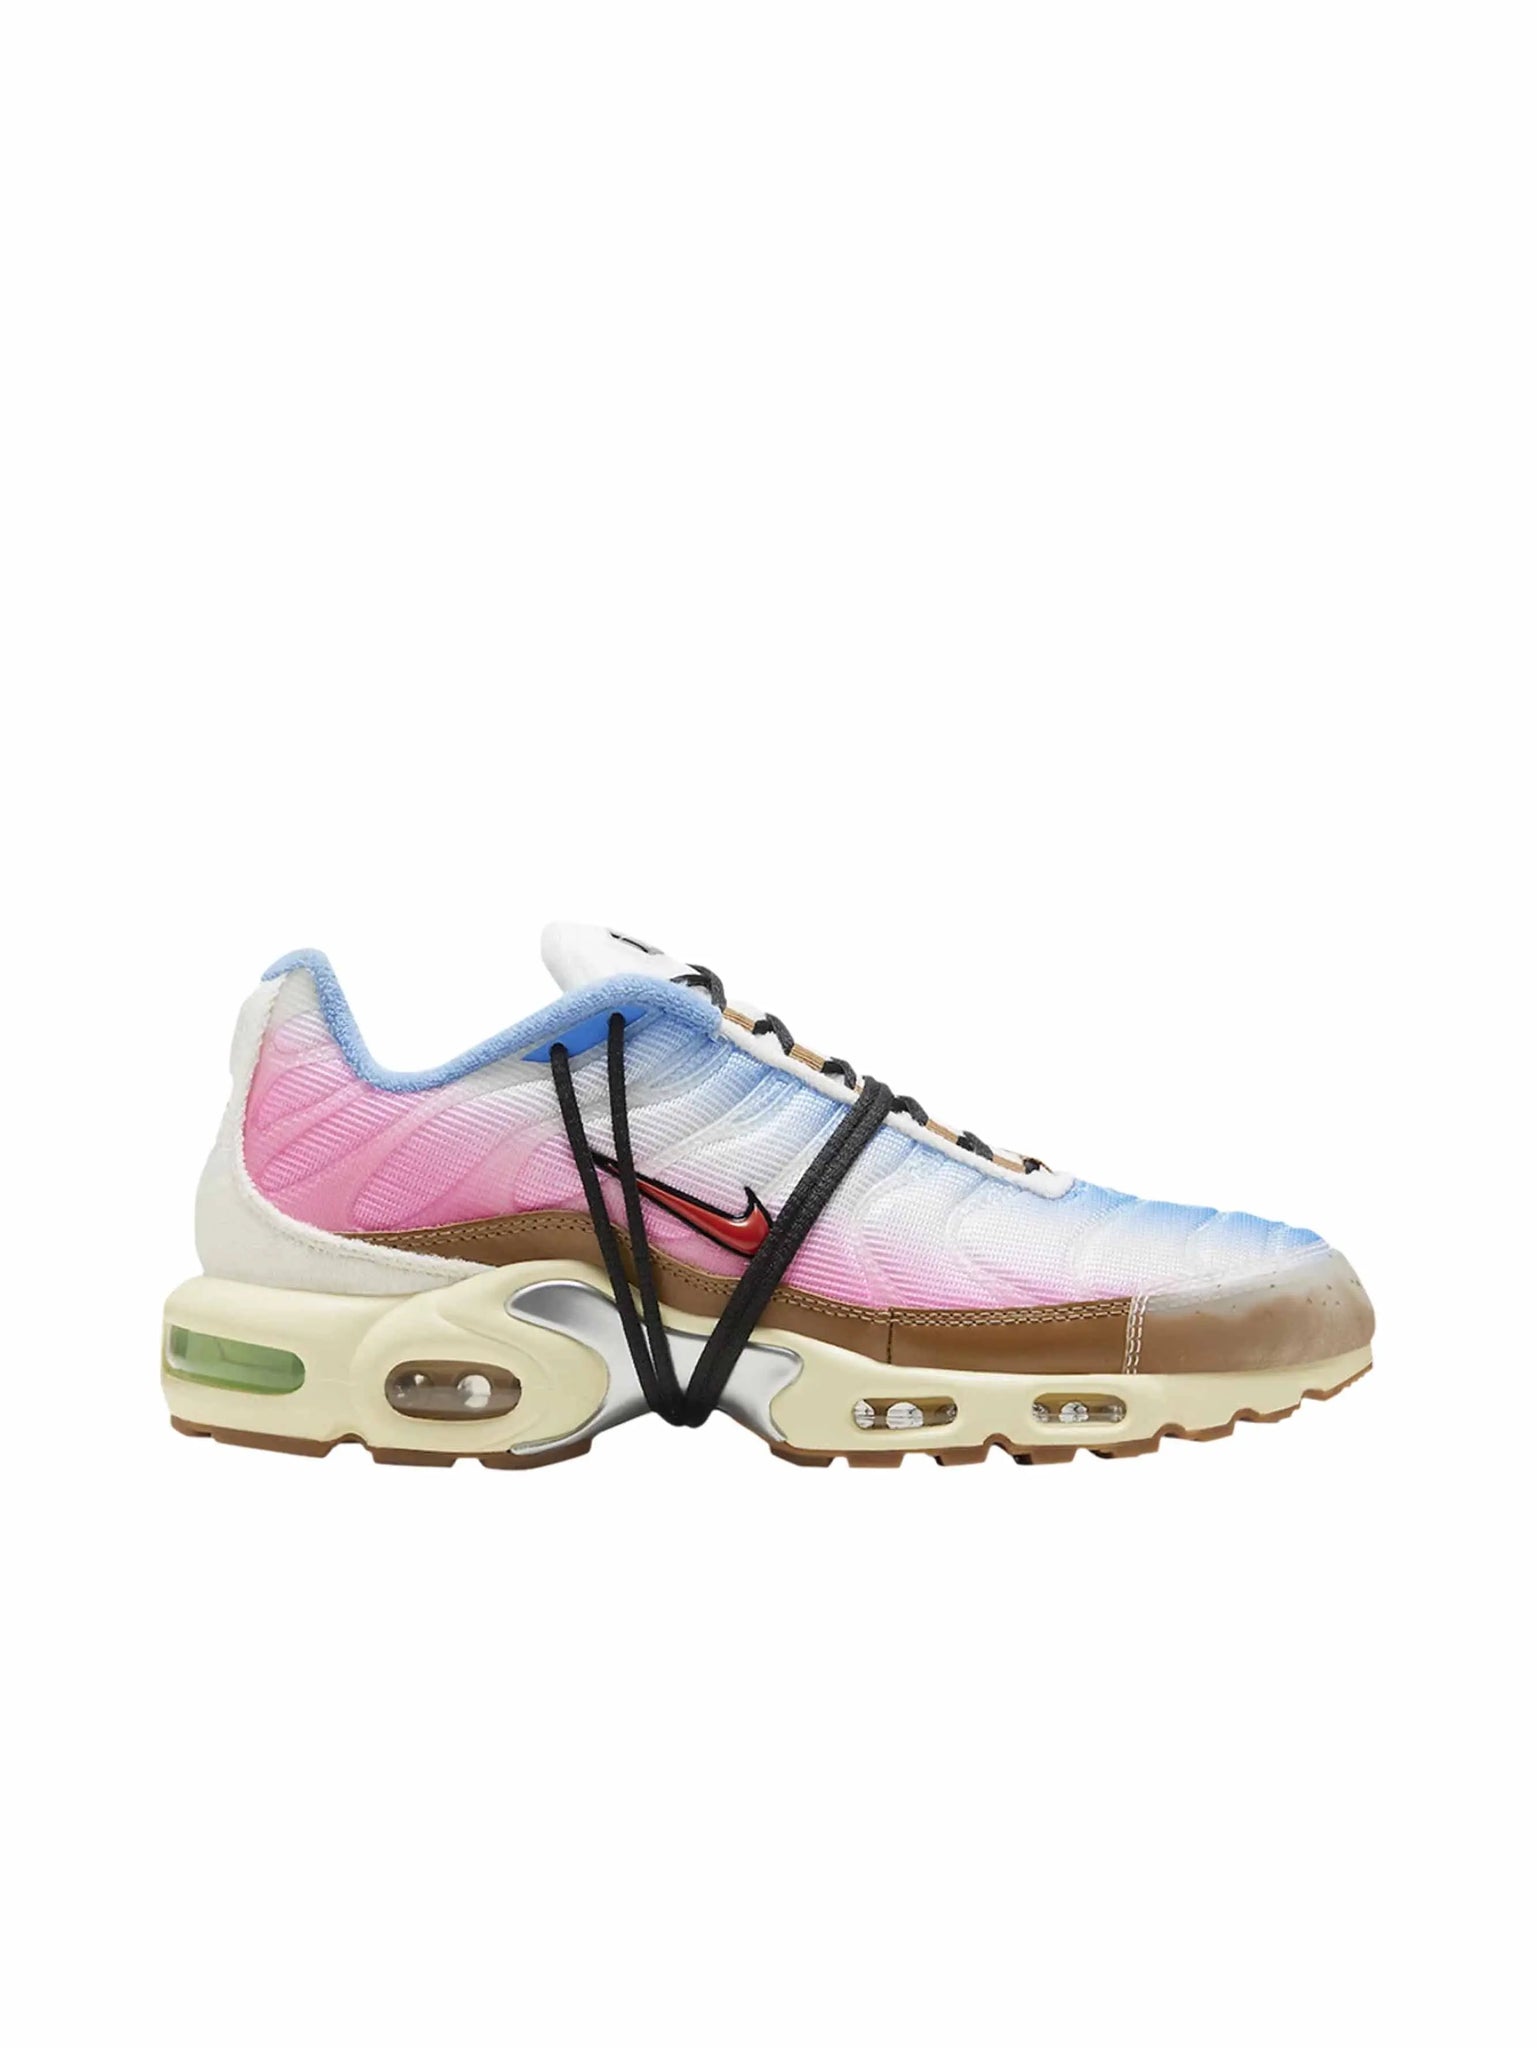 Nike Air Max Plus Longtaitou Festival in Auckland, New Zealand - Shop name